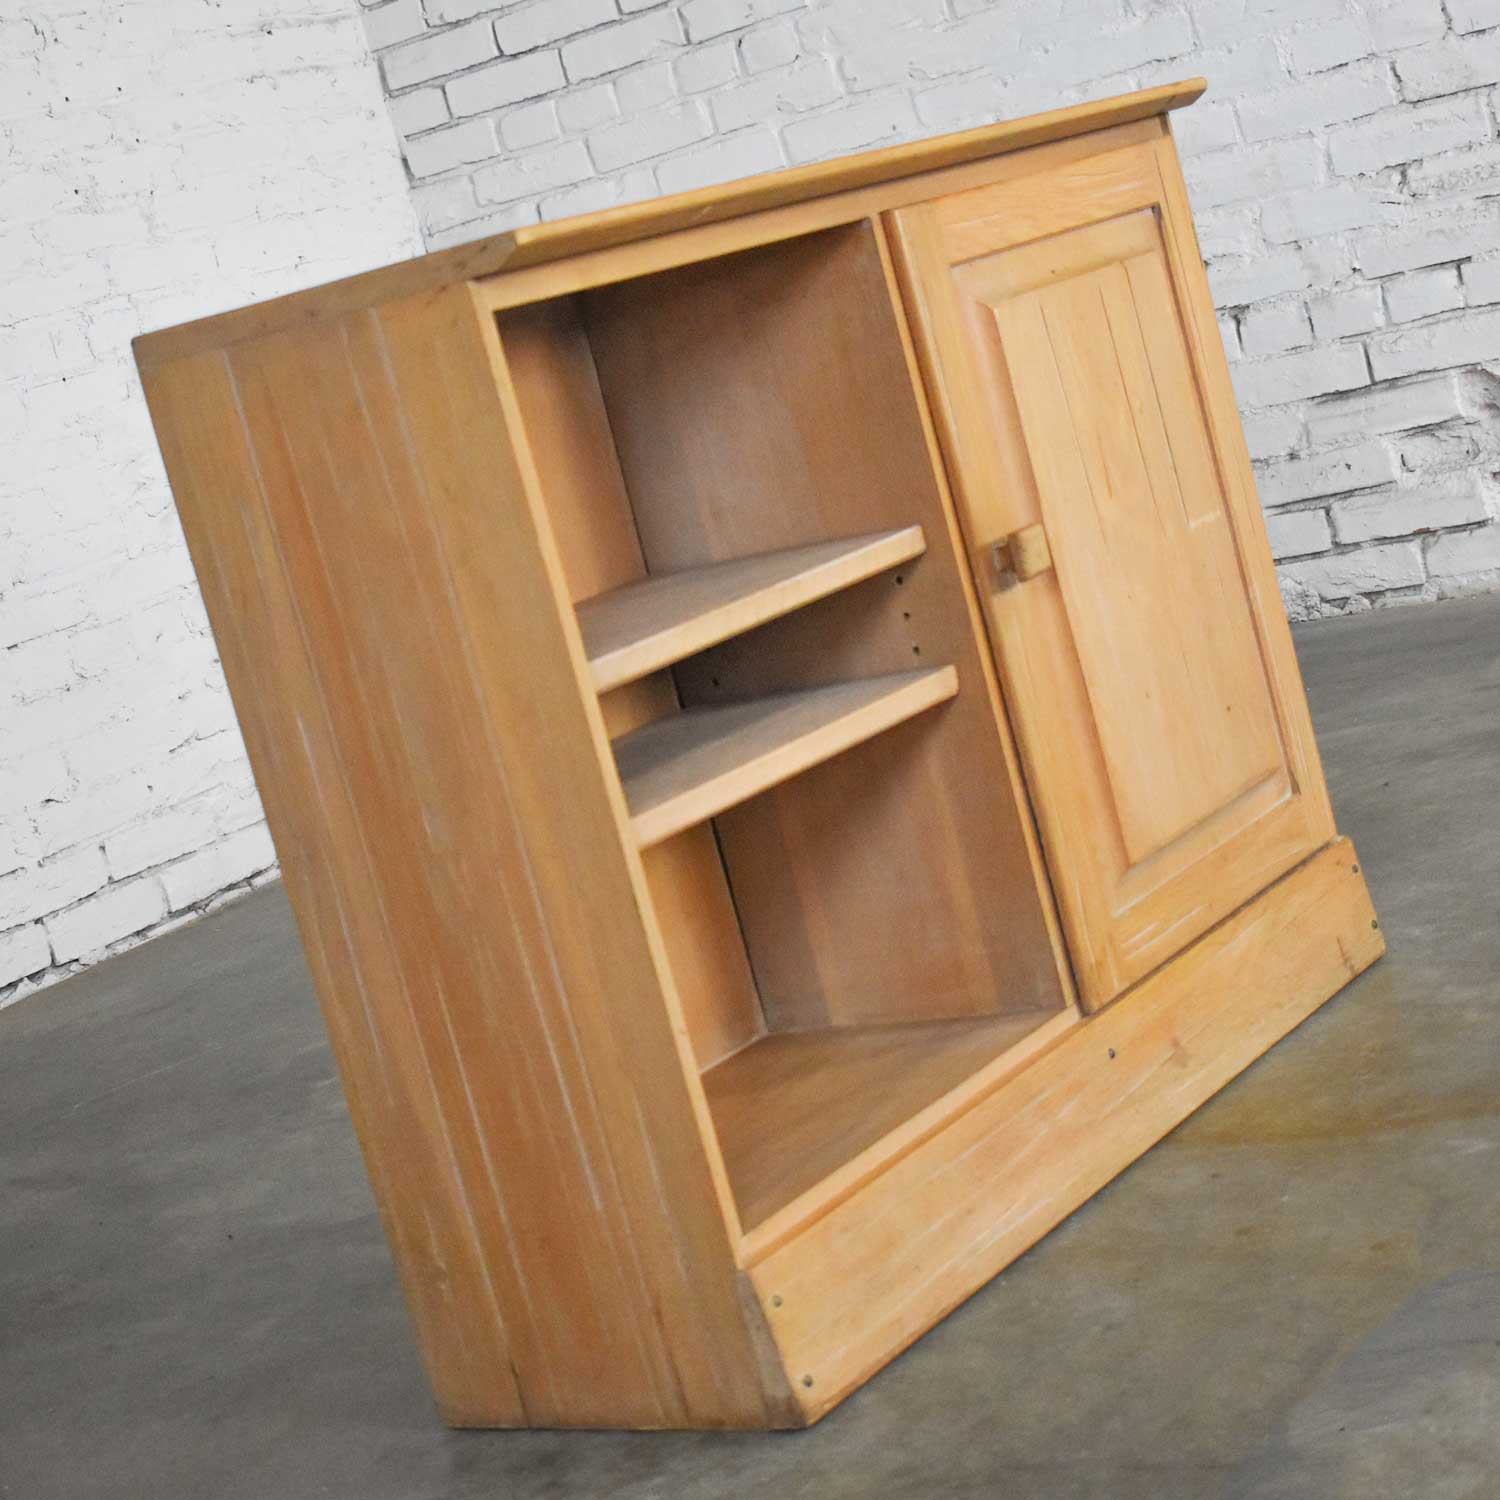 Ranch Oak Small Credenza End Table Cabinet or Nightstand with Natural Oak Finish by A. Brandt